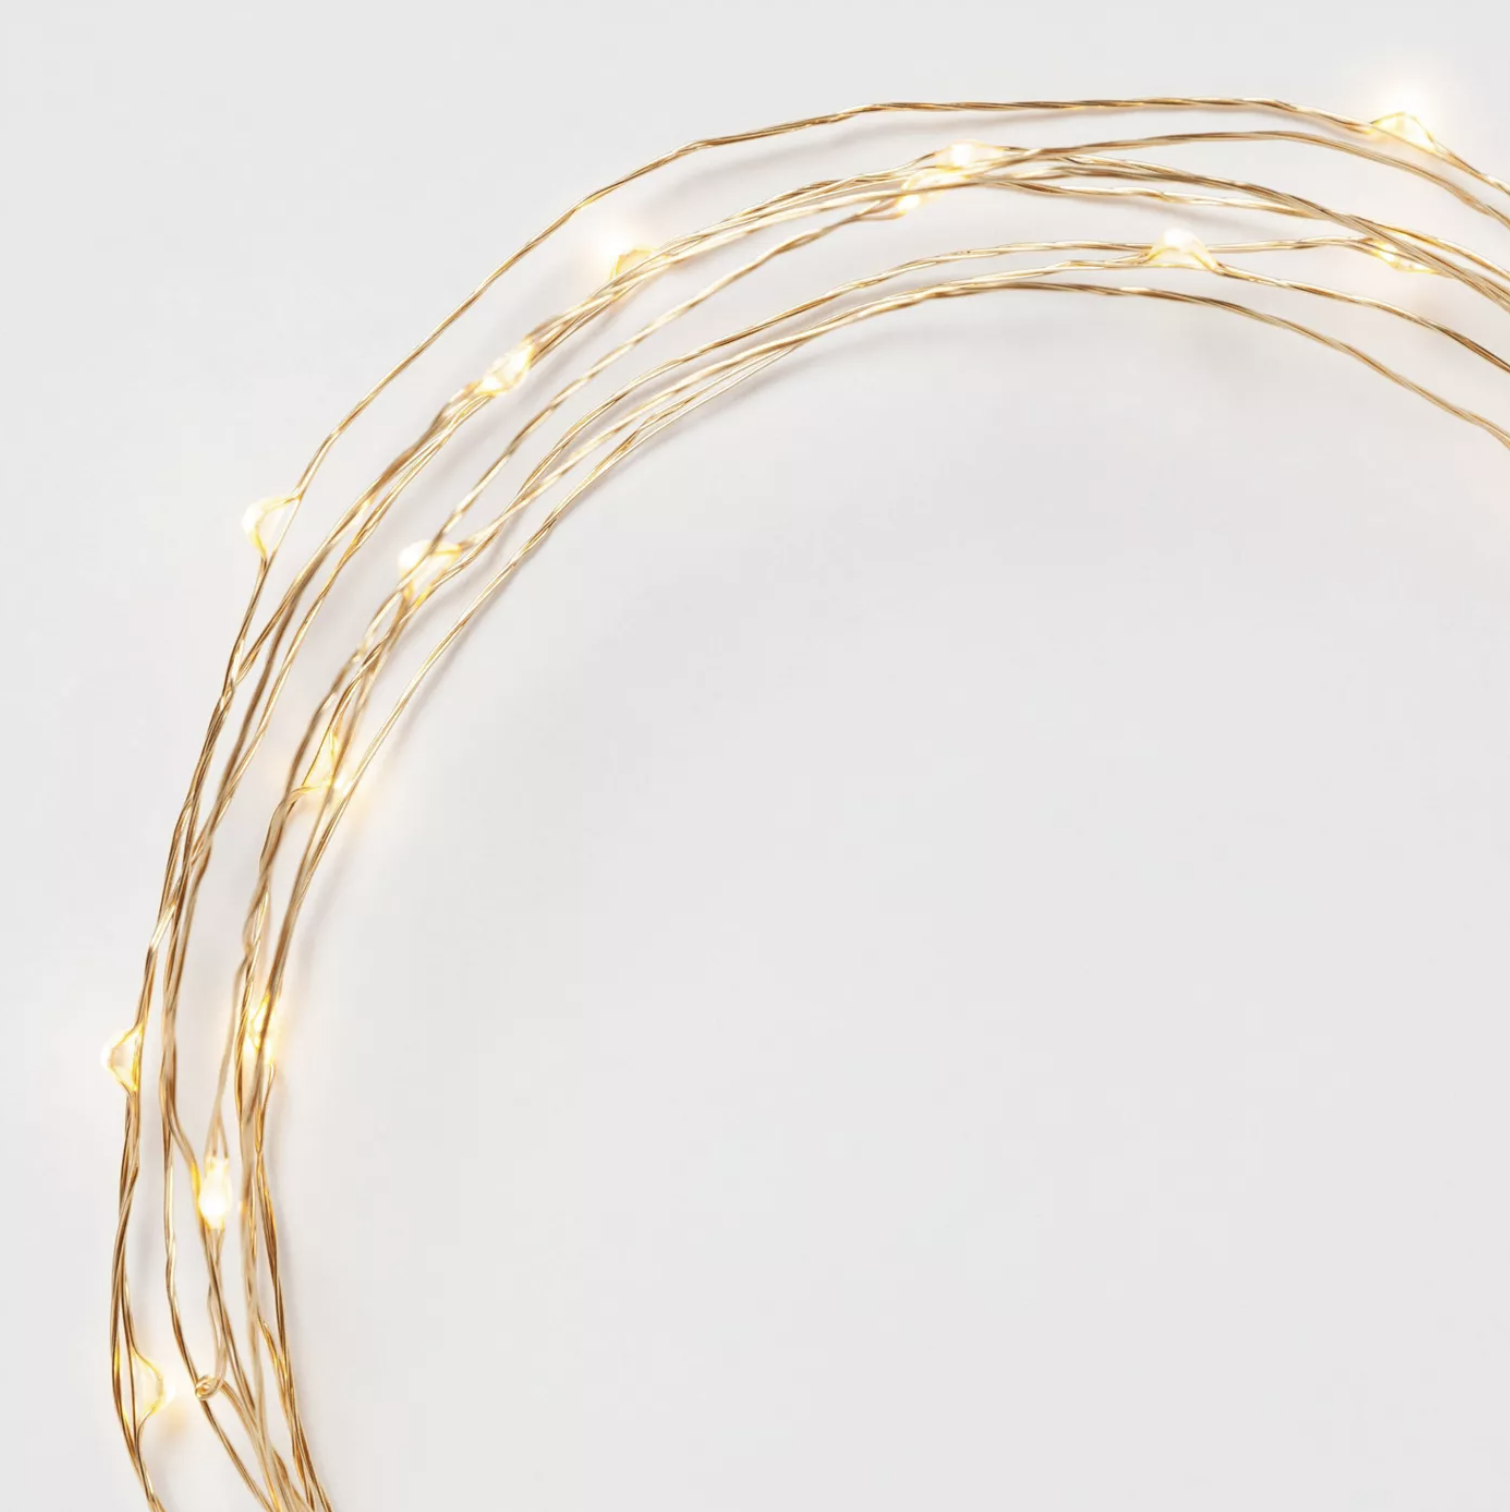 the string of gold fairy lights